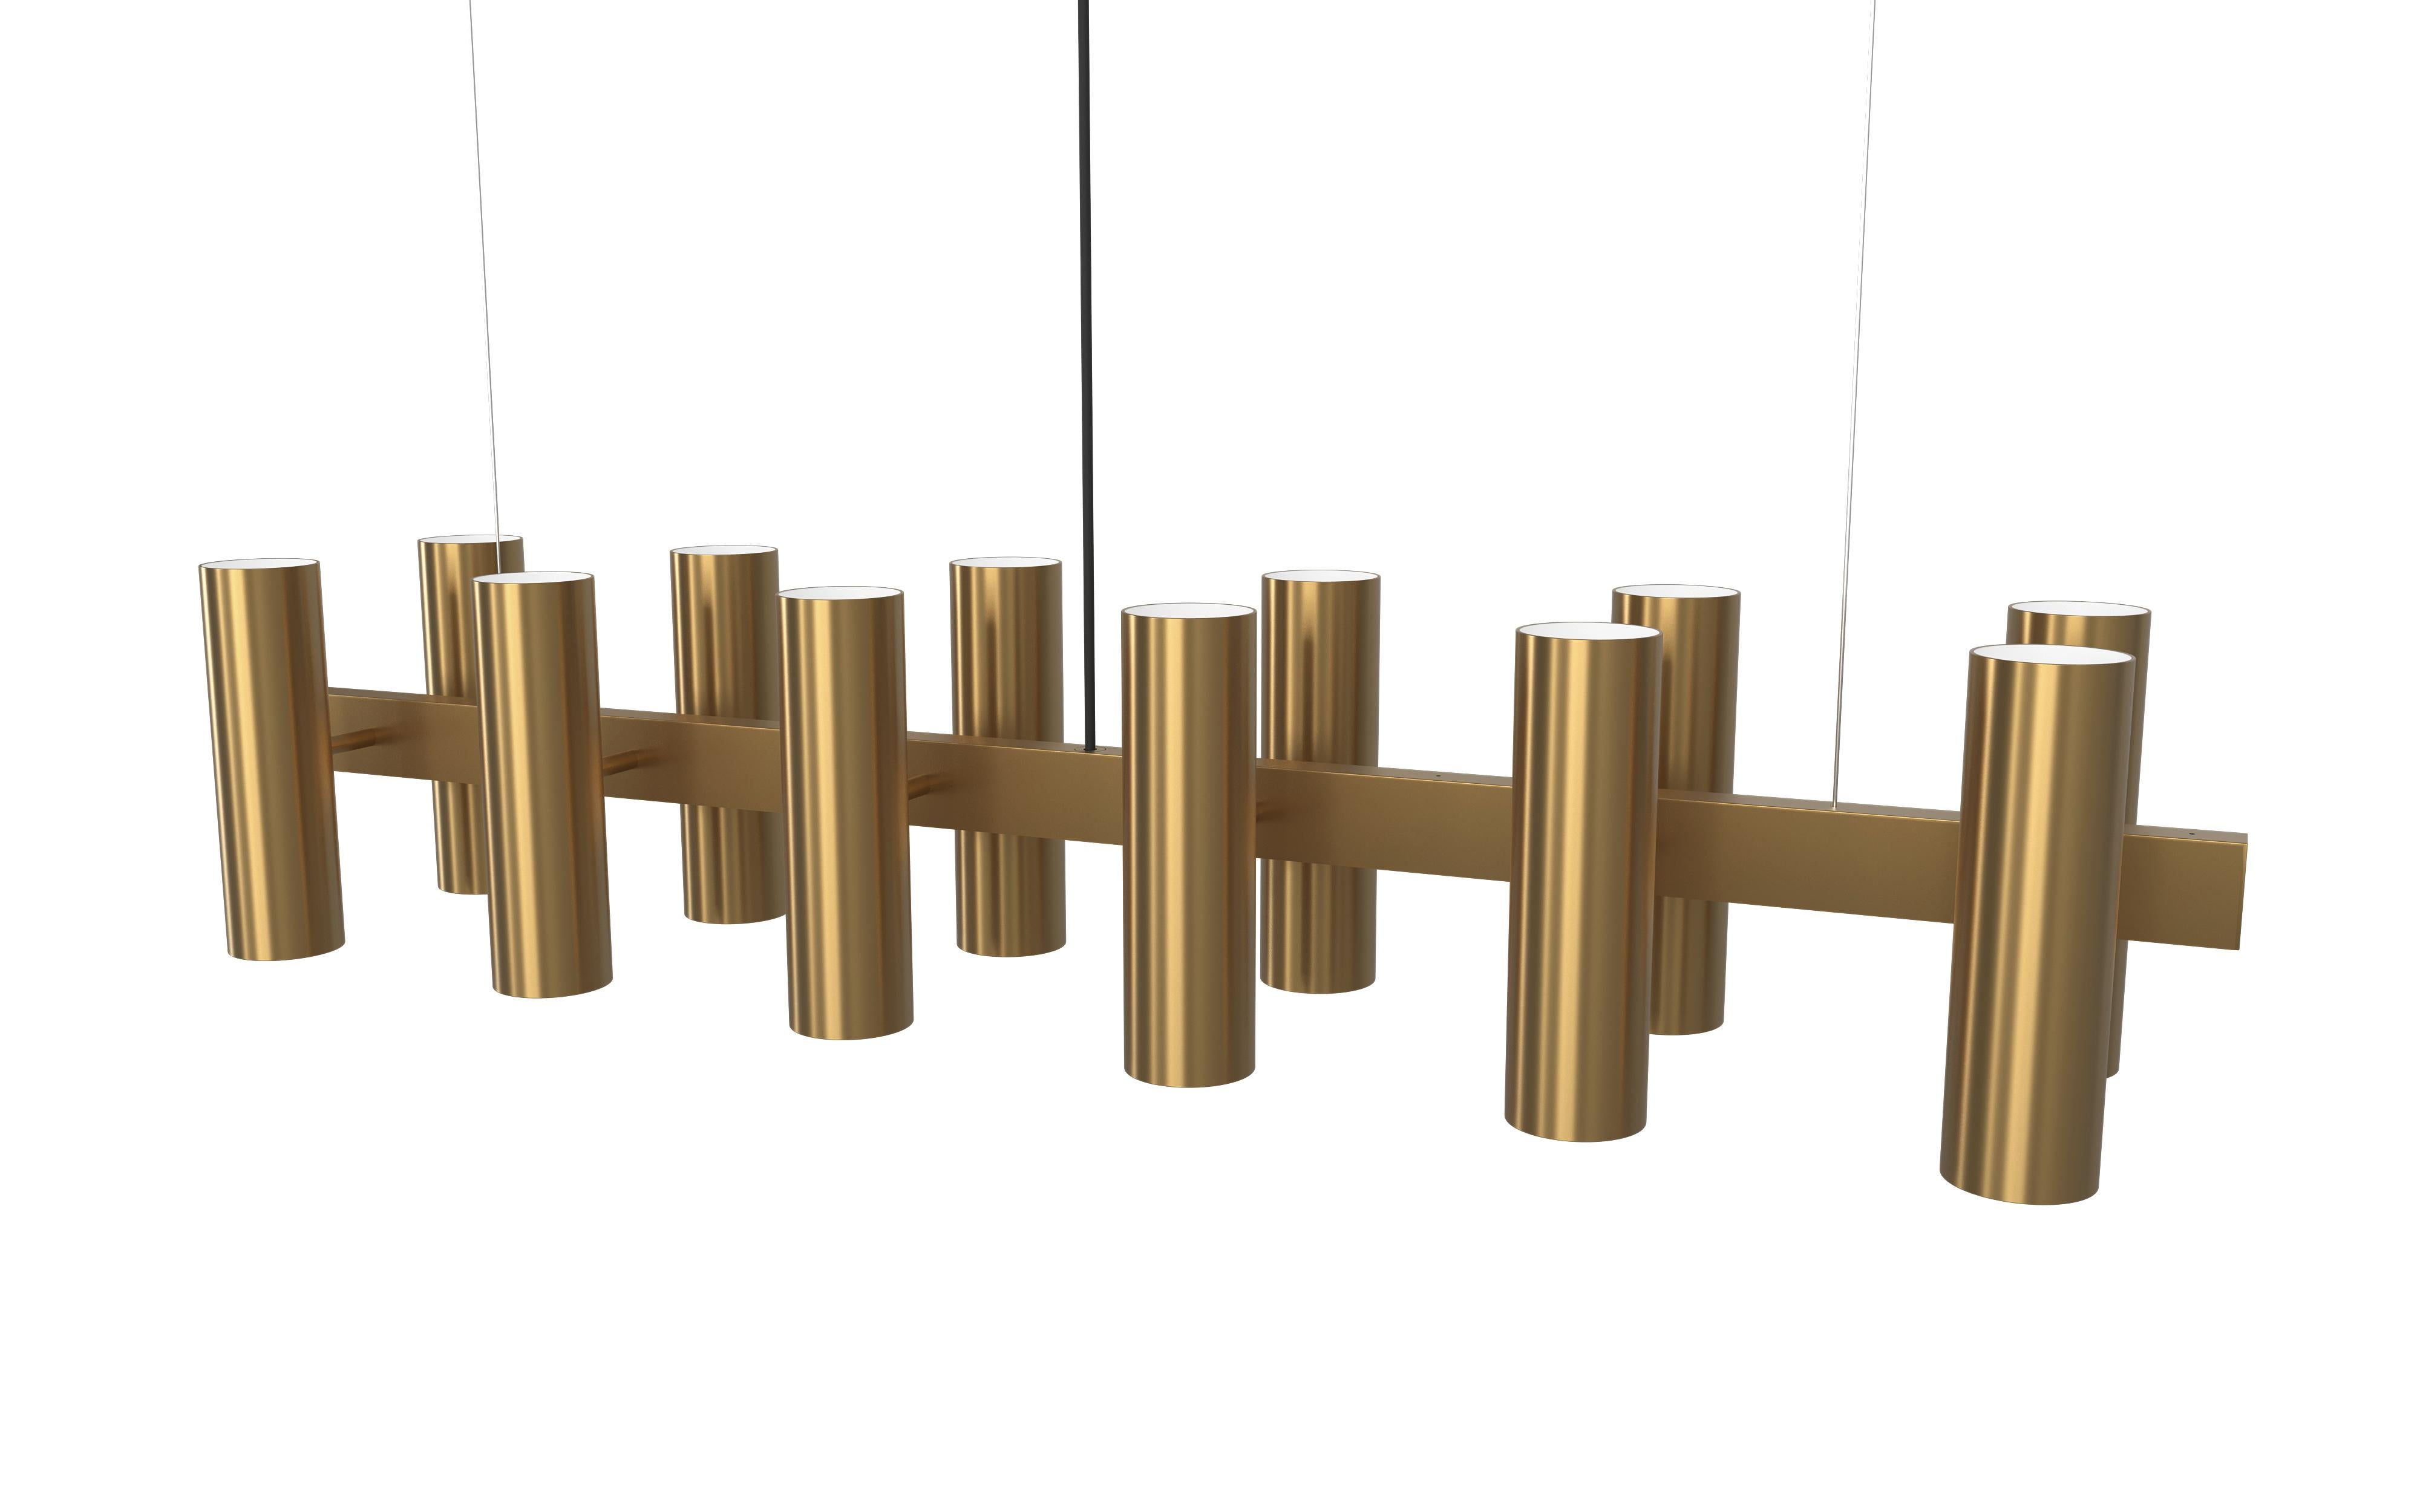 CADOVIUS 900 LAMP pendant lamp by DK3

Size : L: 123 / D: 27 / H: 25 cm
Colors: Brass
Materials : Aluminum anodized

Steel wire: 400cm
Light source: Max 40W E14 (220V – 240V / 50 Hz)
Bulbs not included

---
The 900·00 lamp, designed by Poul Cadovius